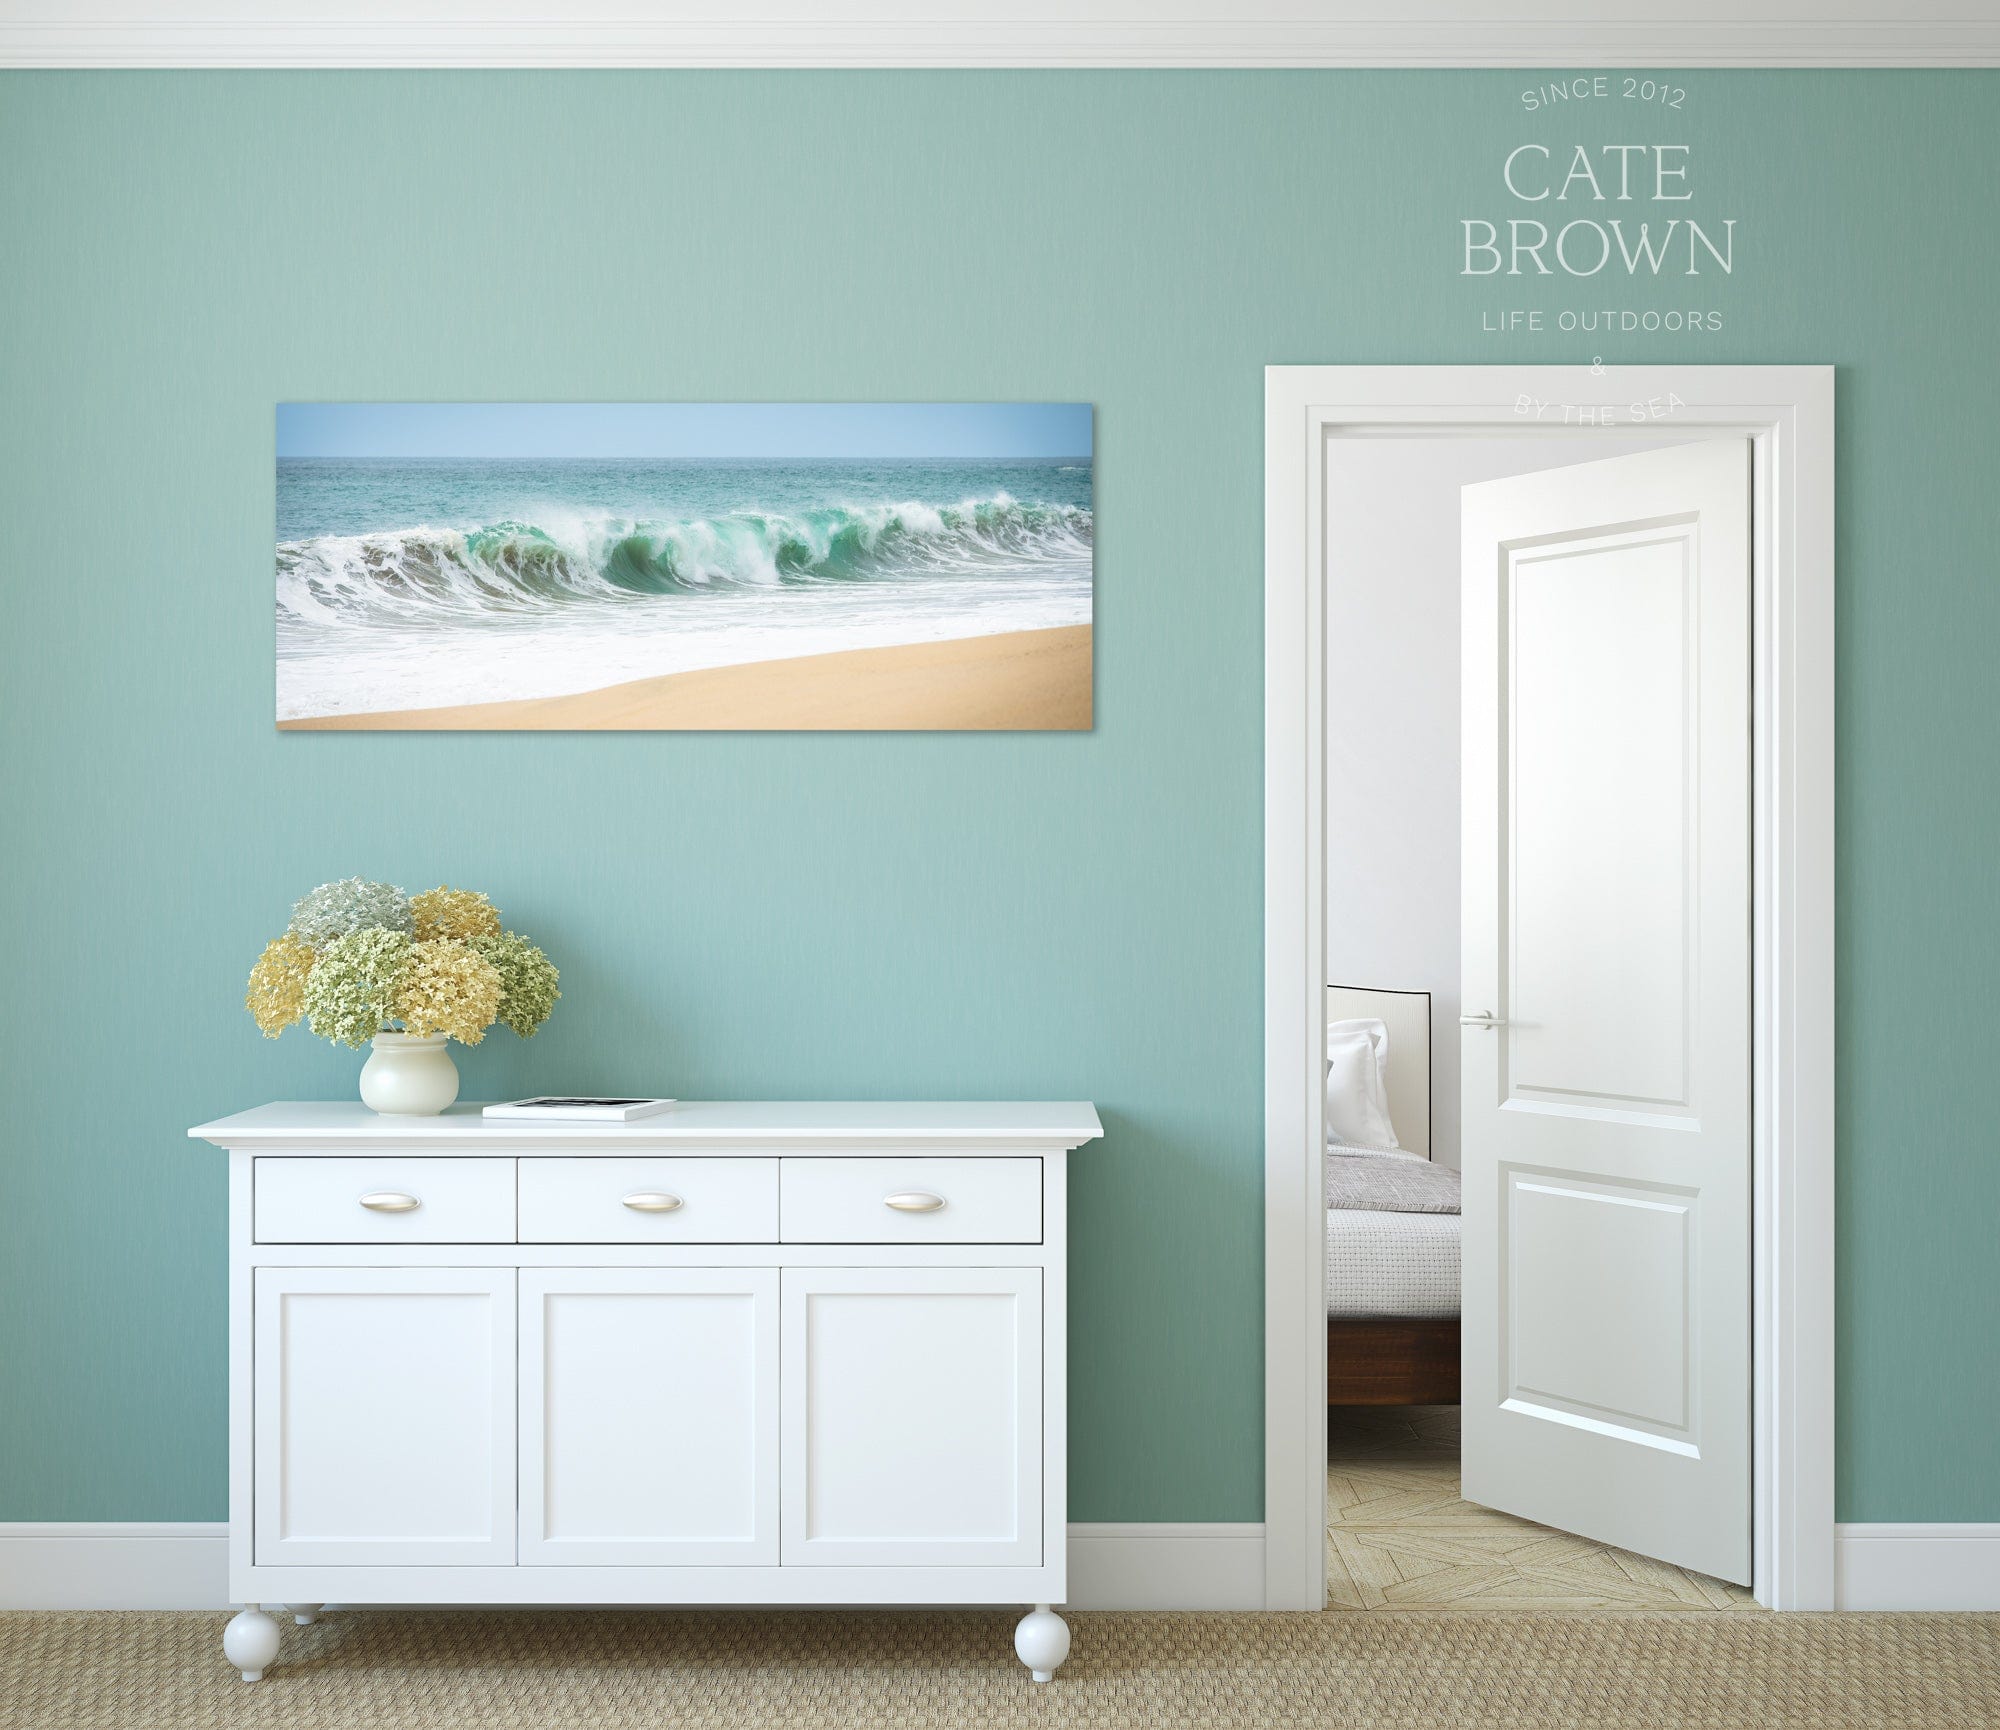 Cate Brown Photo Canvas / 12"x30" / None (Print Only) Tinaja Wave Panoramic  //  Seascape Photography Made to Order Ocean Fine Art